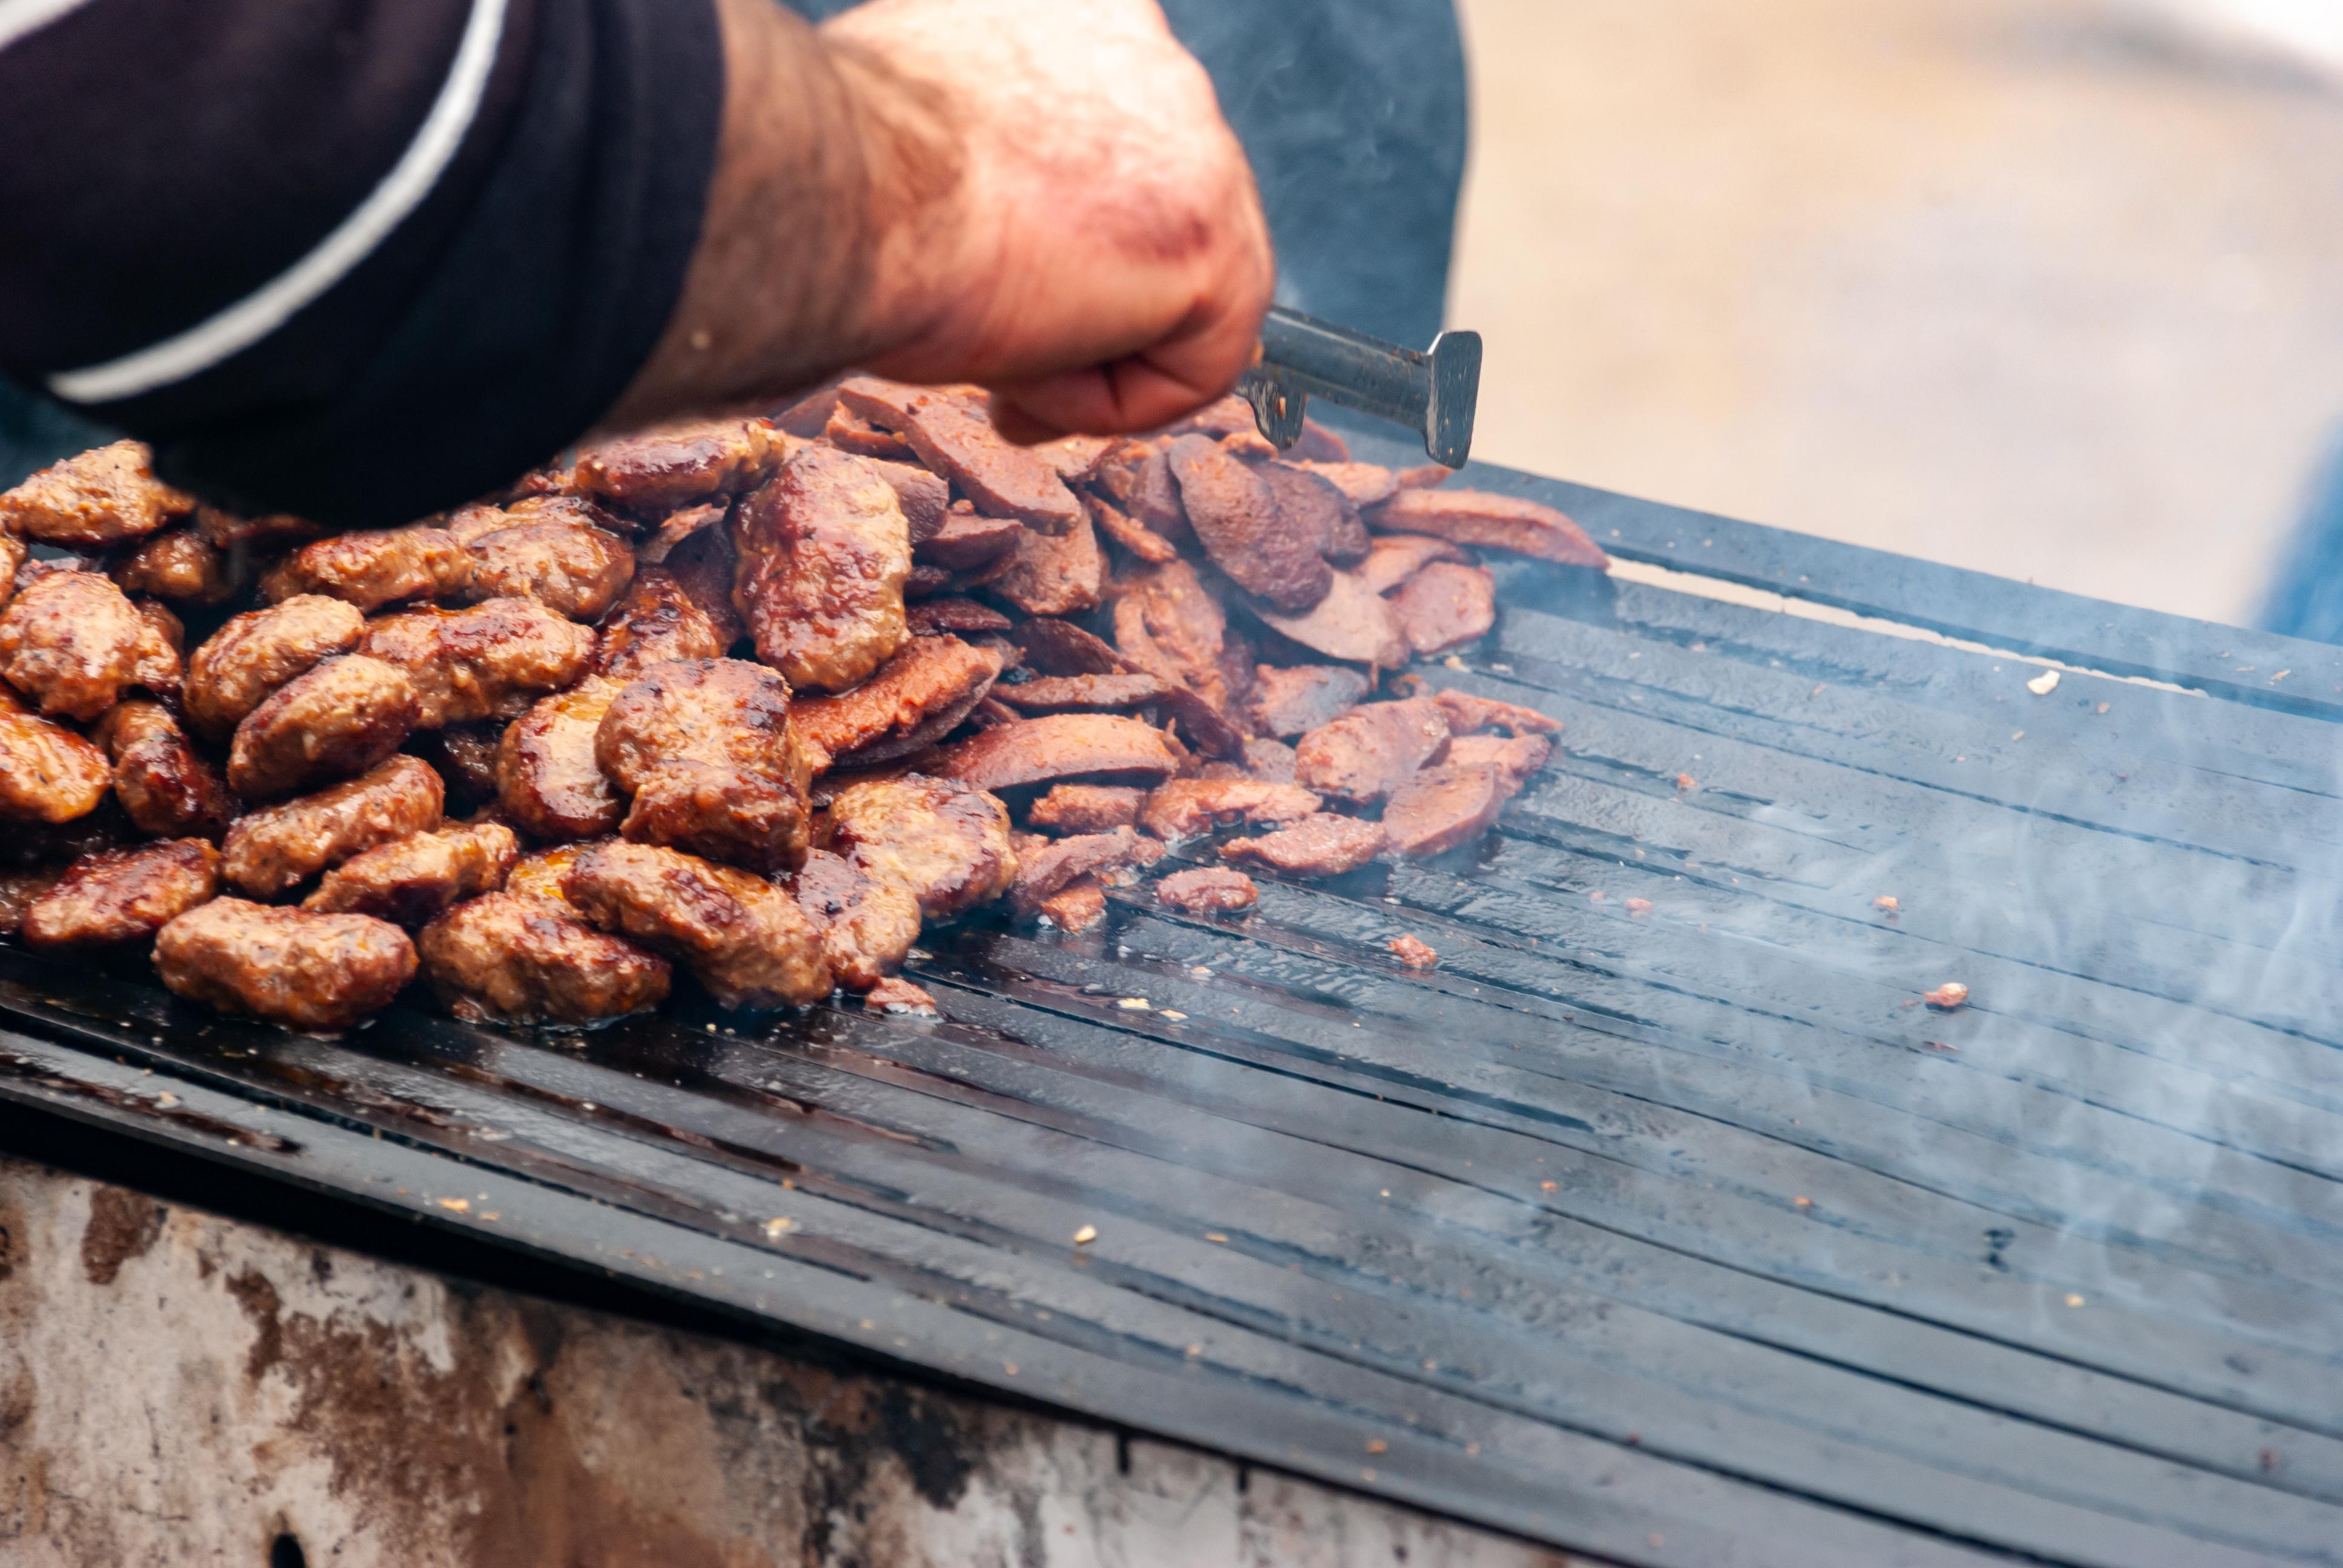 Have you ever dreamed of trying camel? Try some grilled! © Ersoy Basciftci / Shutterstock